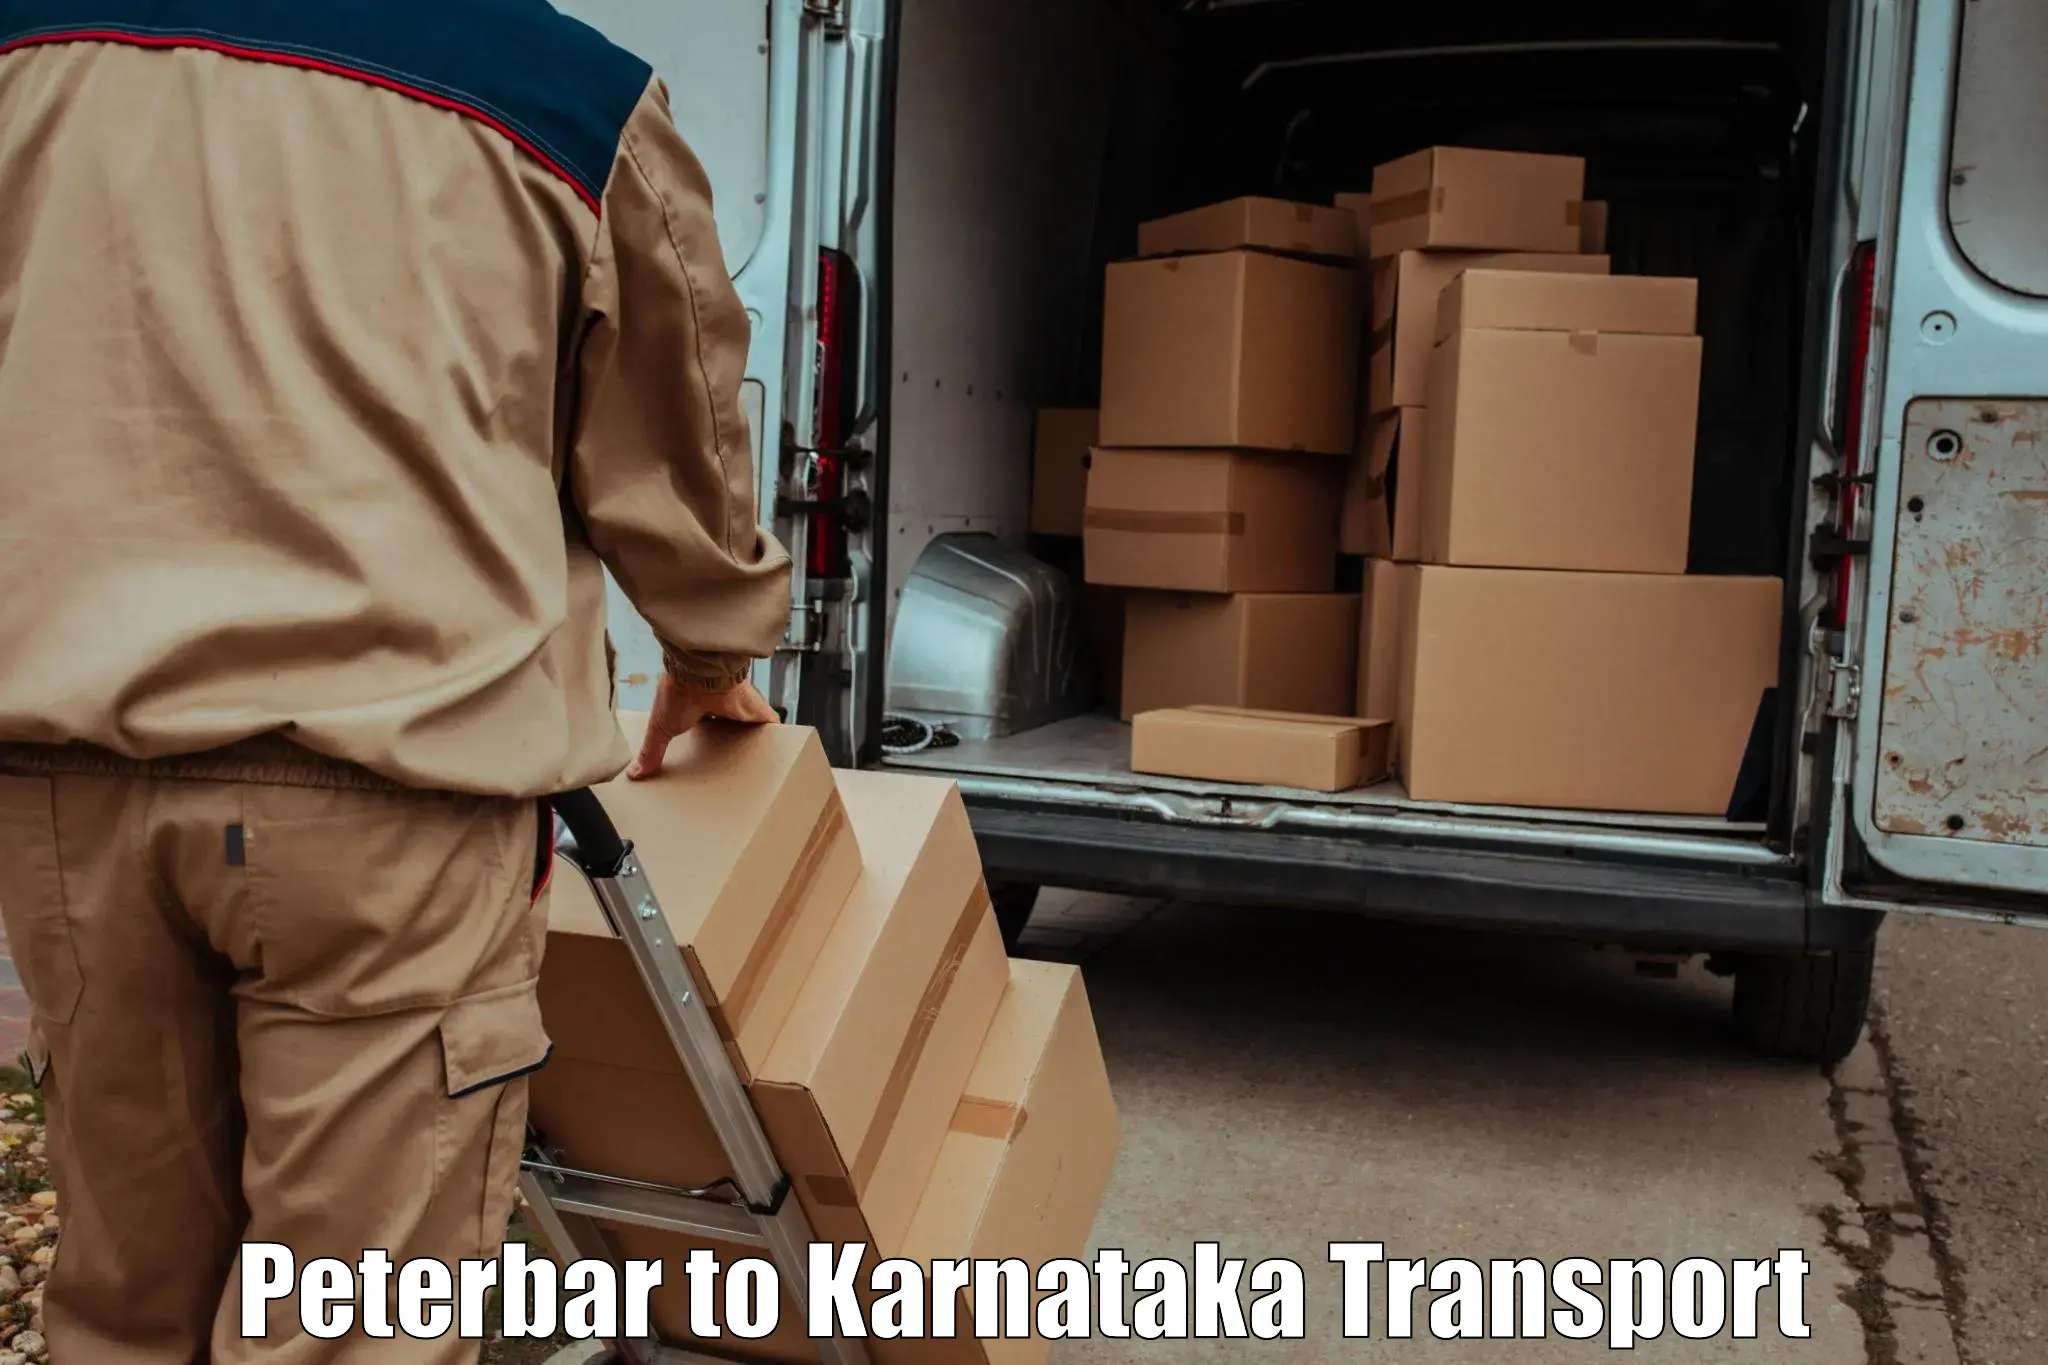 Domestic goods transportation services Peterbar to Indian Institute of Science Bangalore